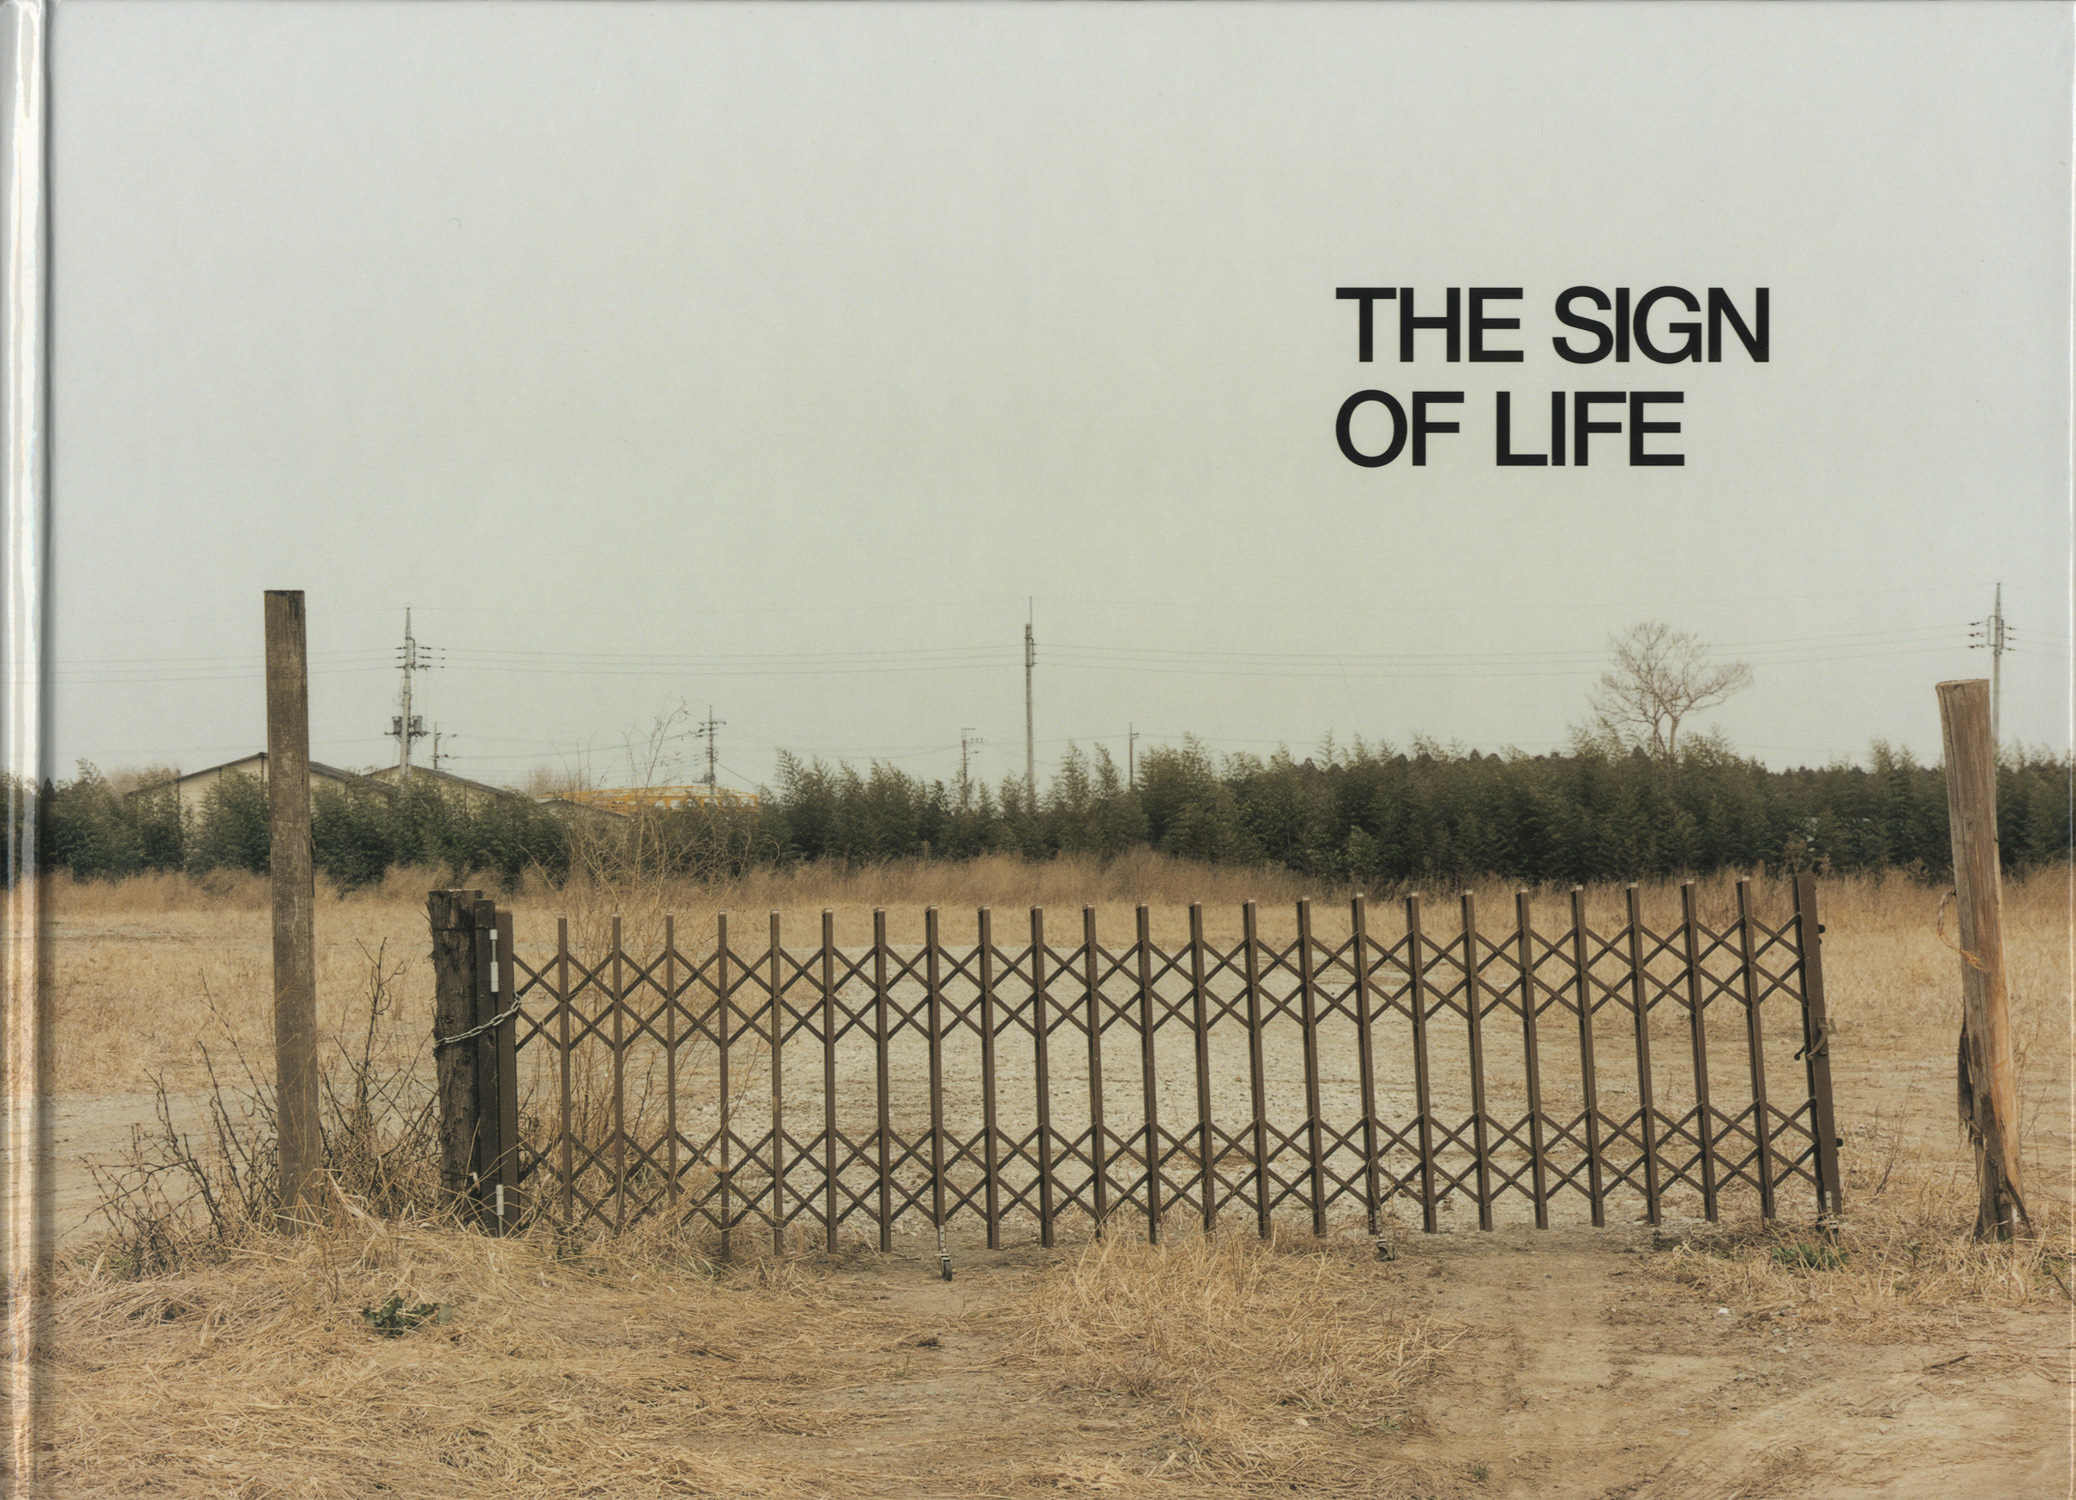 THE SIGN OF LIFE